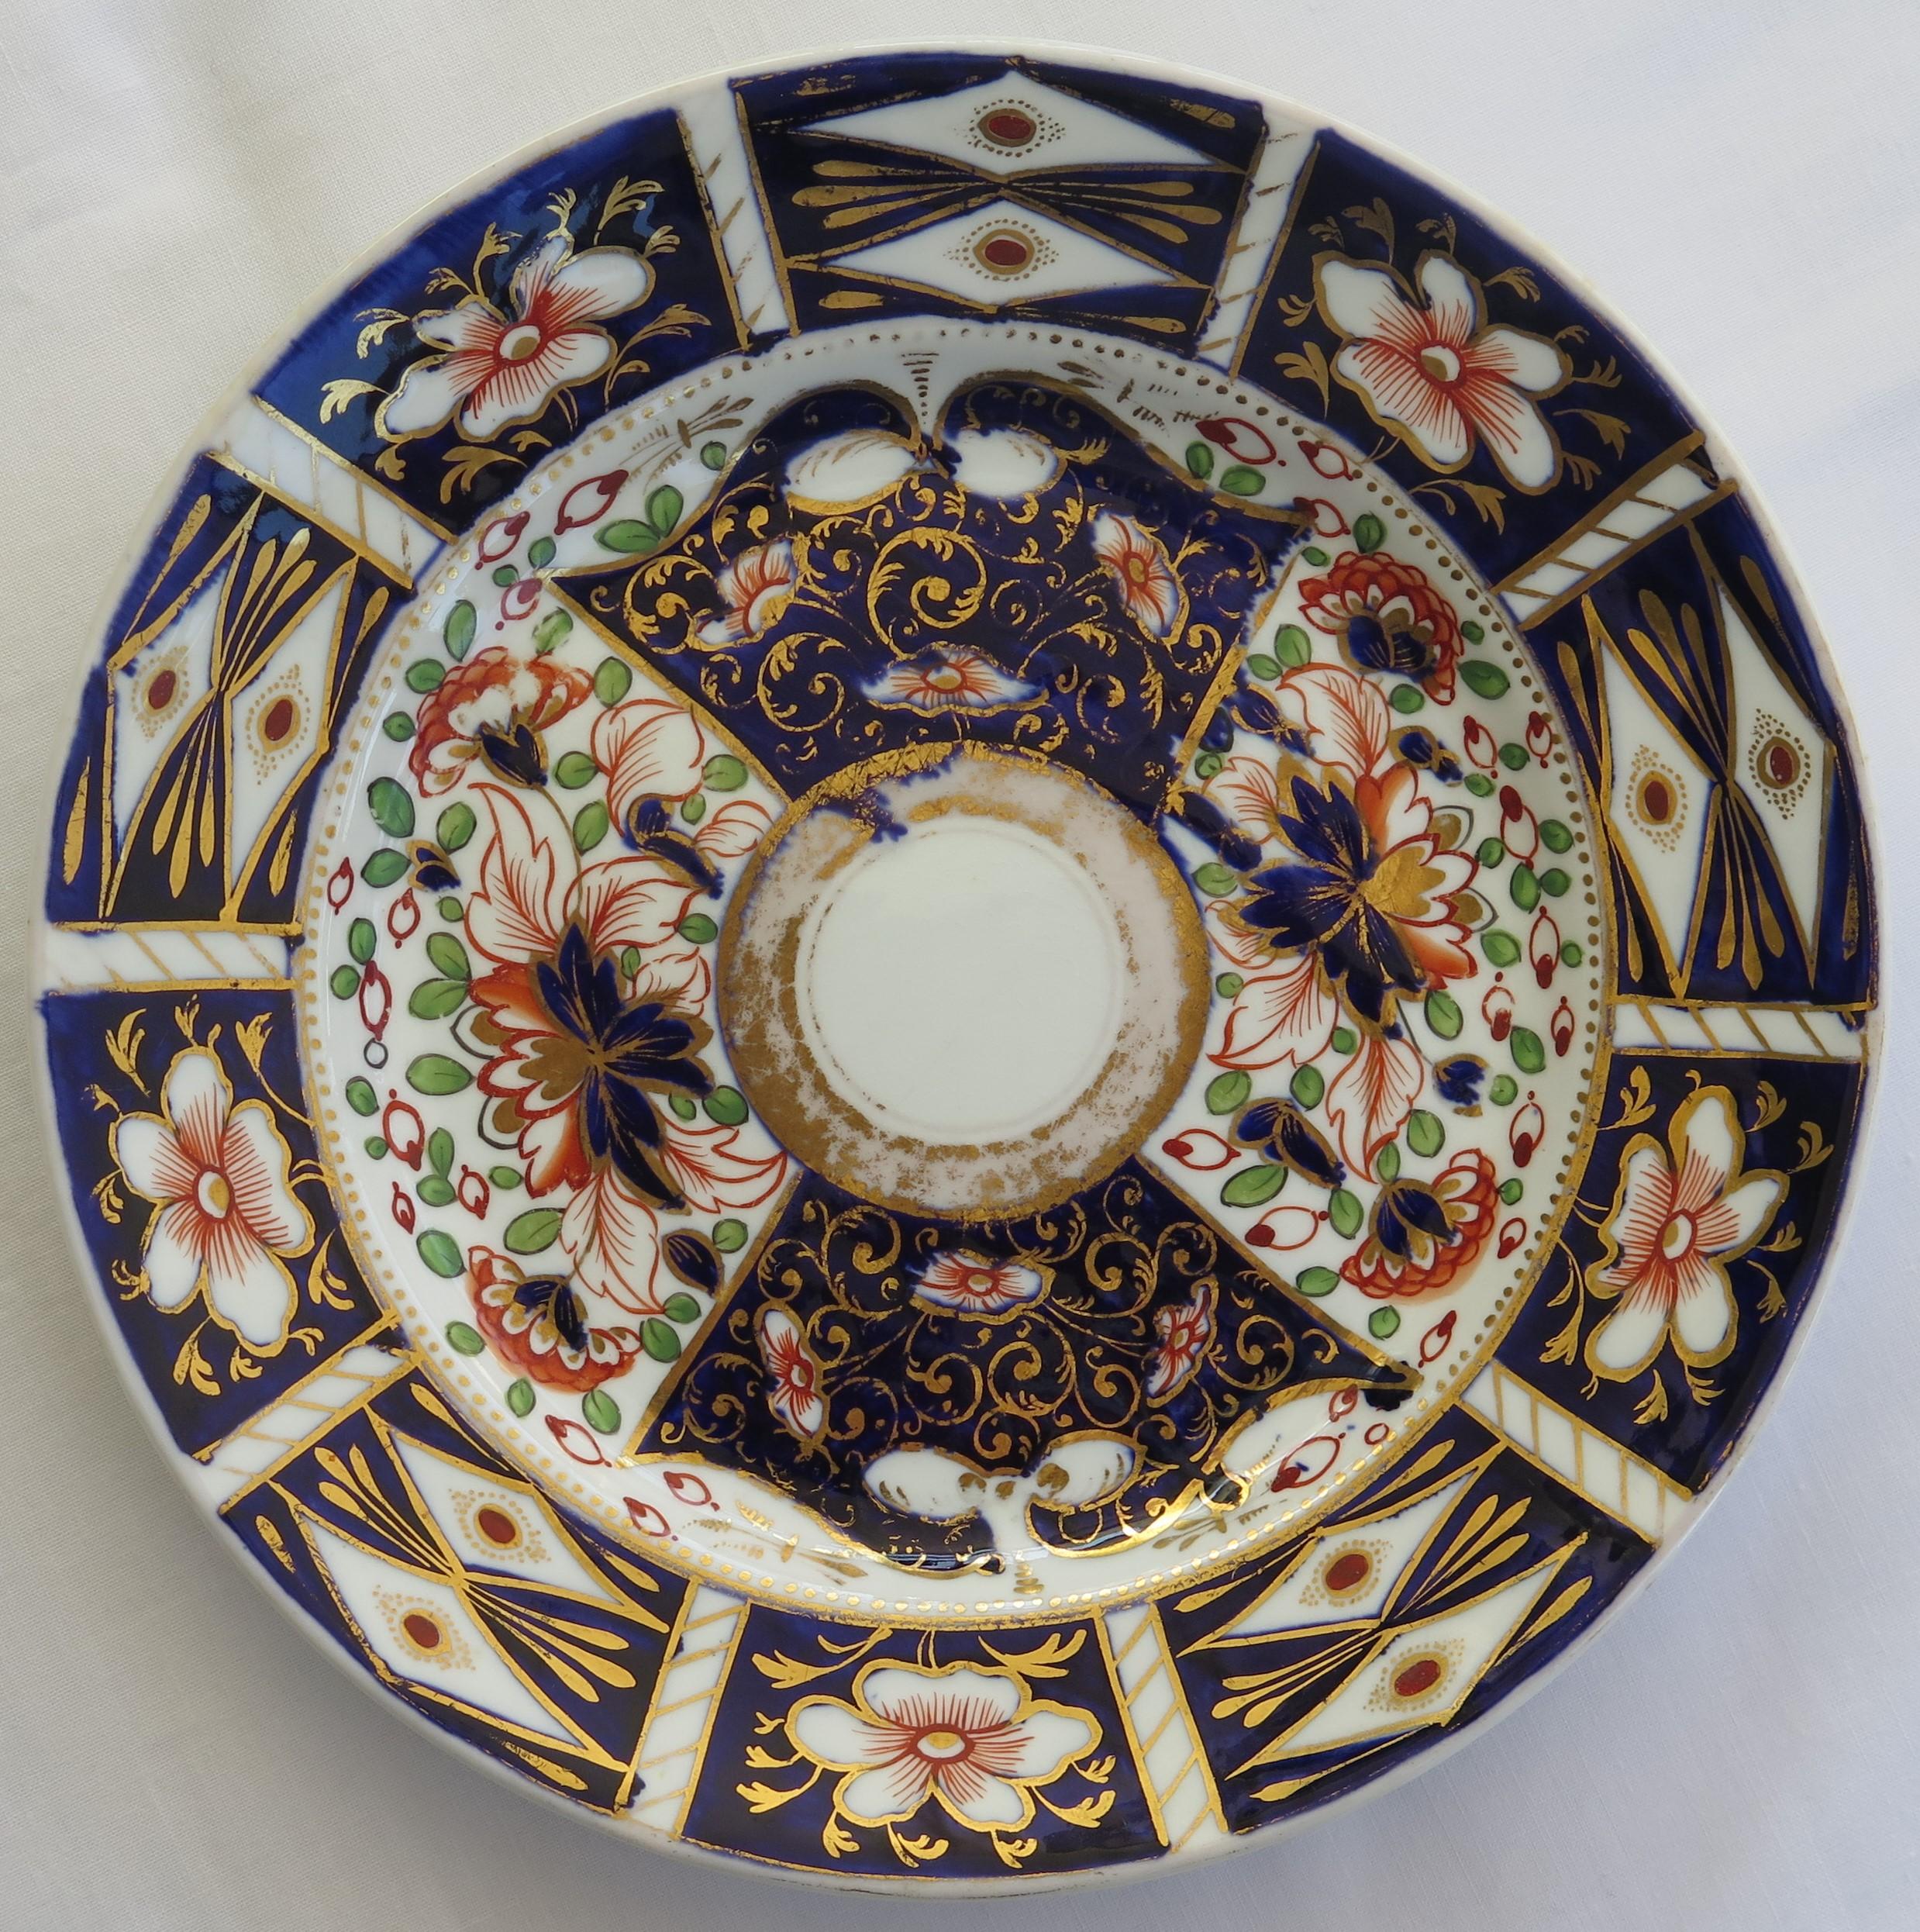 SIX Davenport Porcelain Plates Hand Painted and Gilded Pattern, Circa 1870 For Sale 10